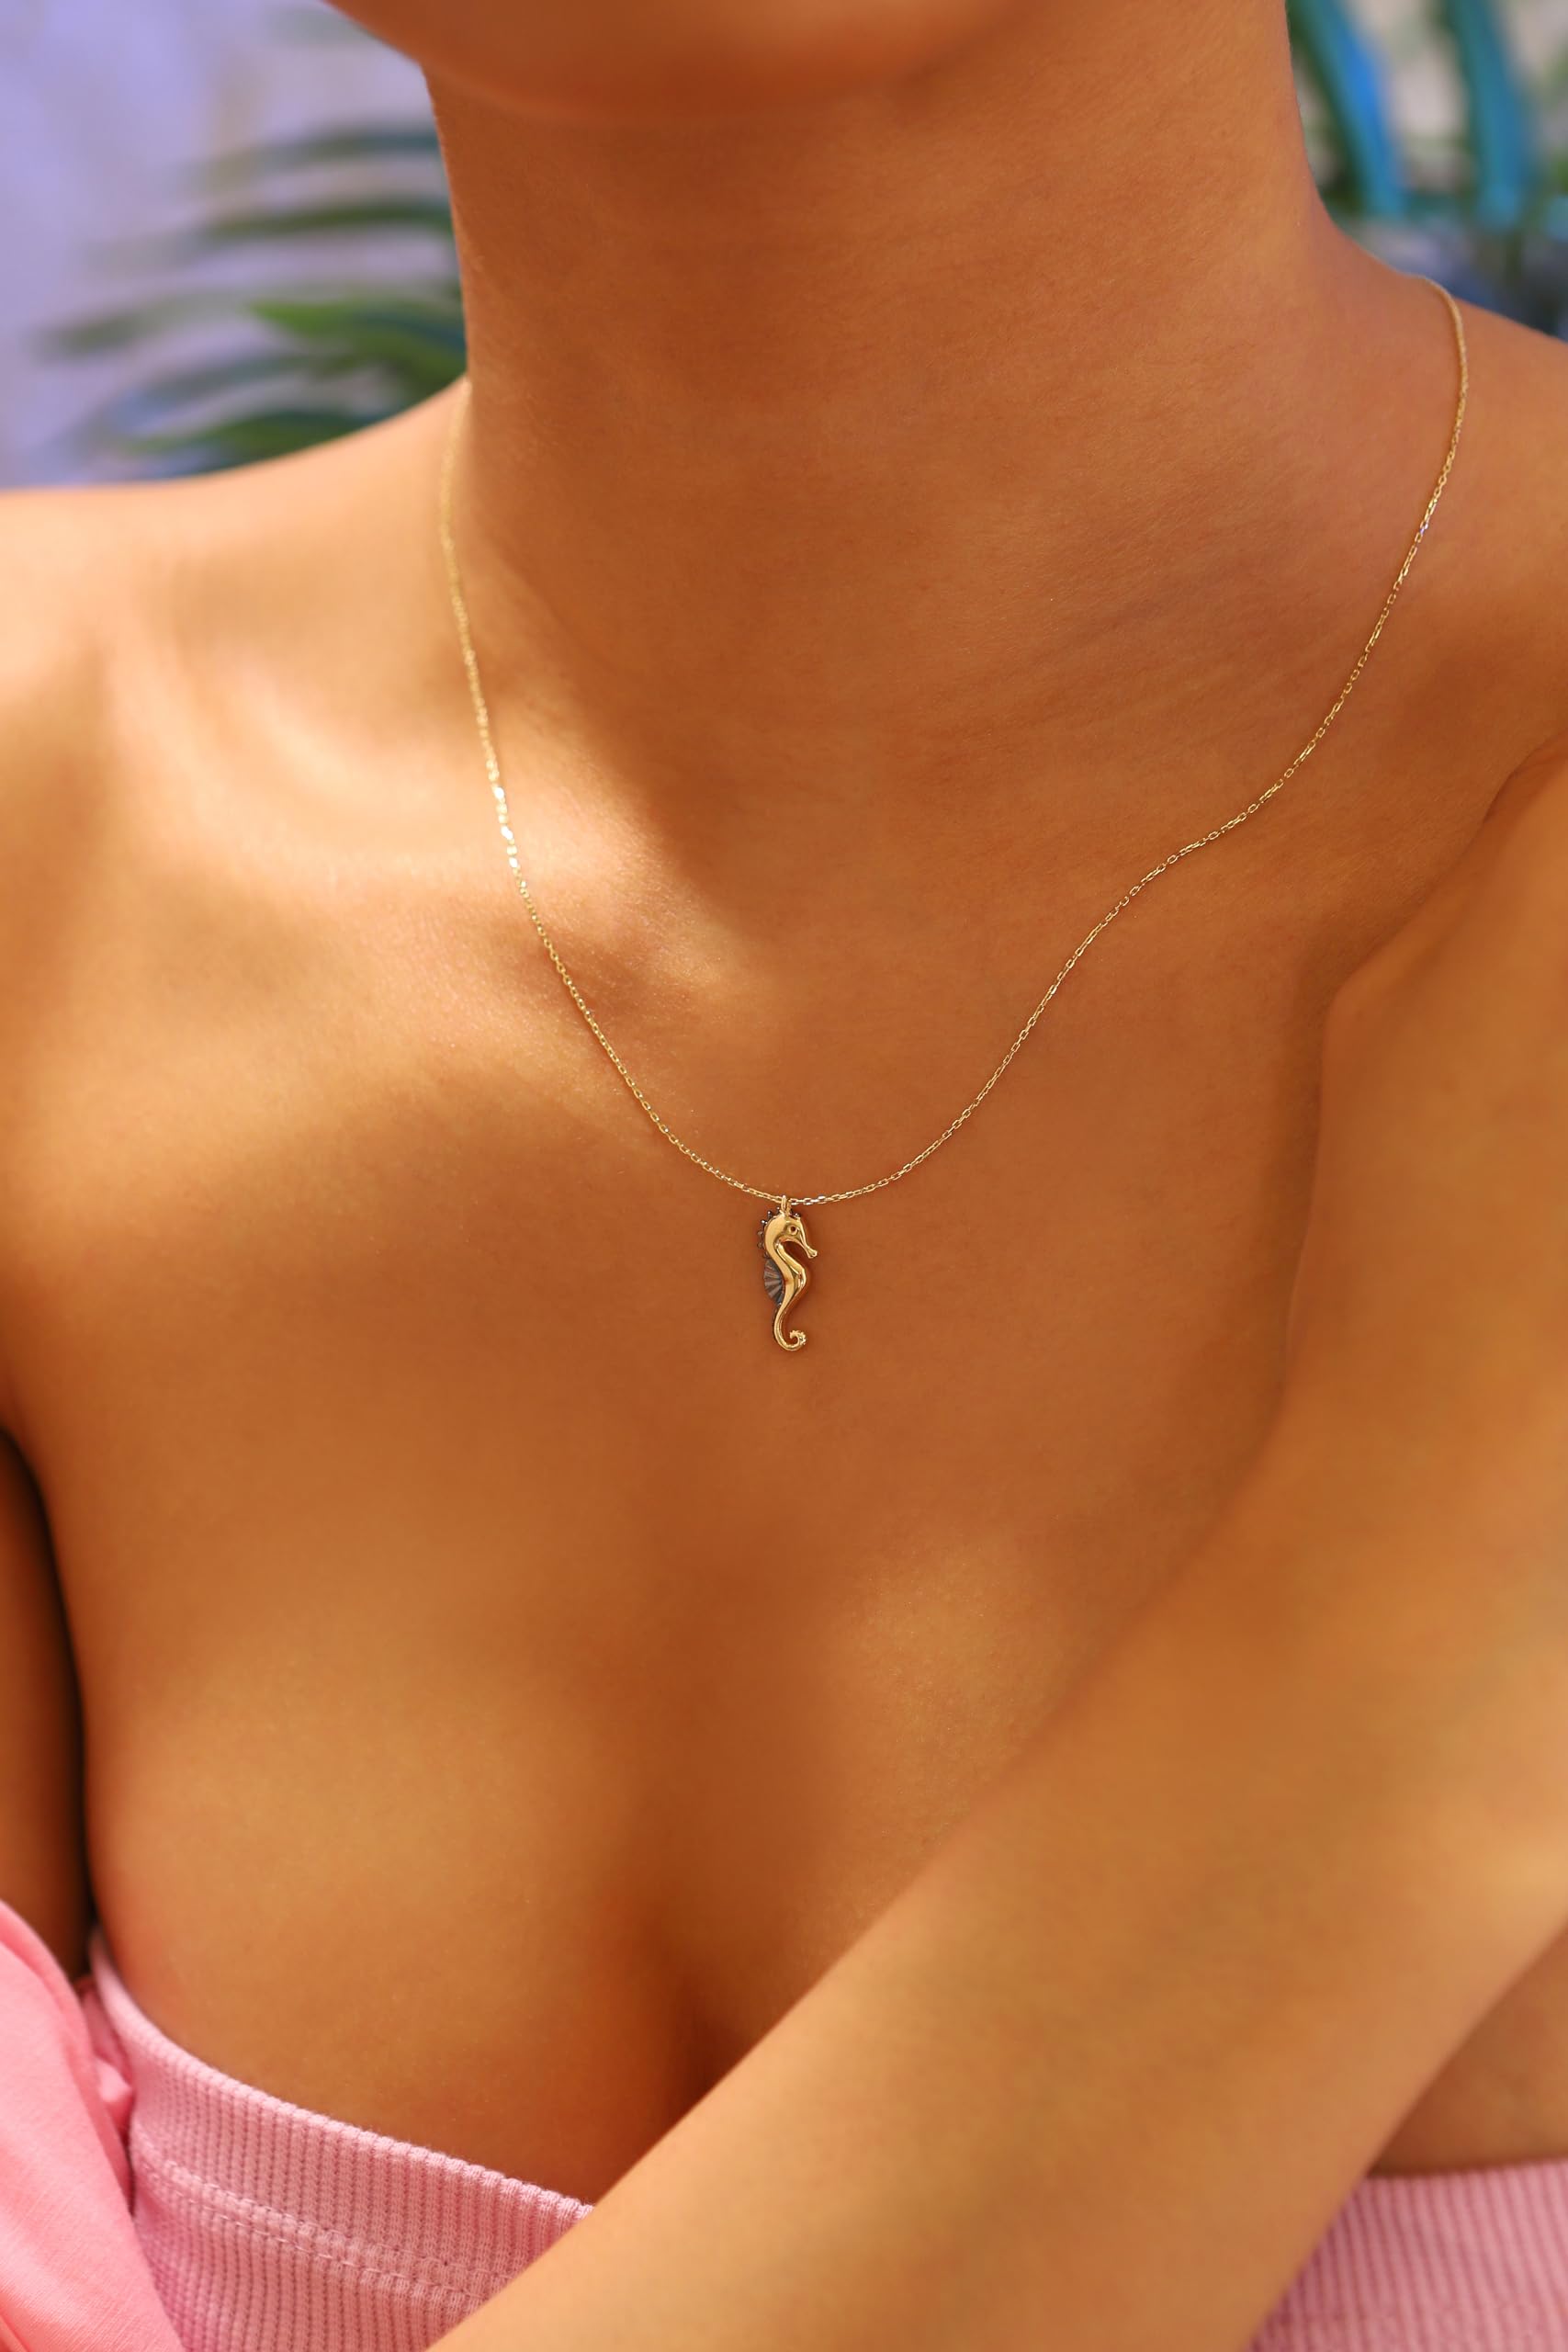 kk goldjewelry 14K Real Gold Seahorse Pendant, Dainty initial Animal Necklace, Minimalist Gold Seahorse Necklace, Birthday Gift